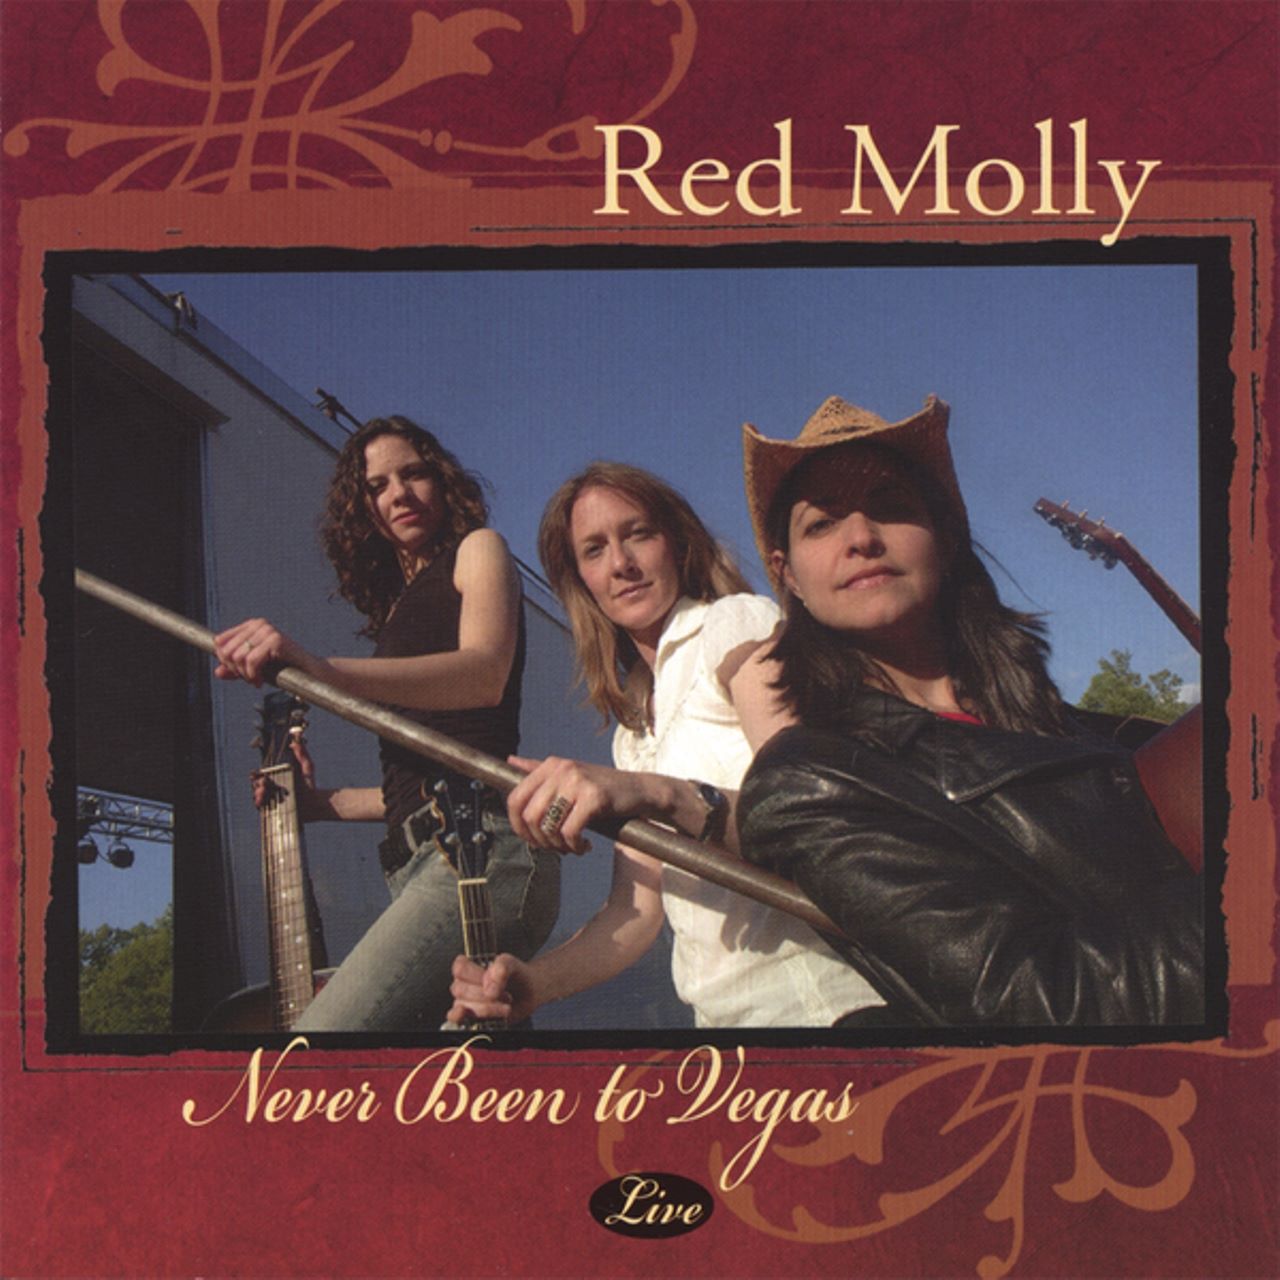 Red Molly - Never Been To Vegas cover akbum